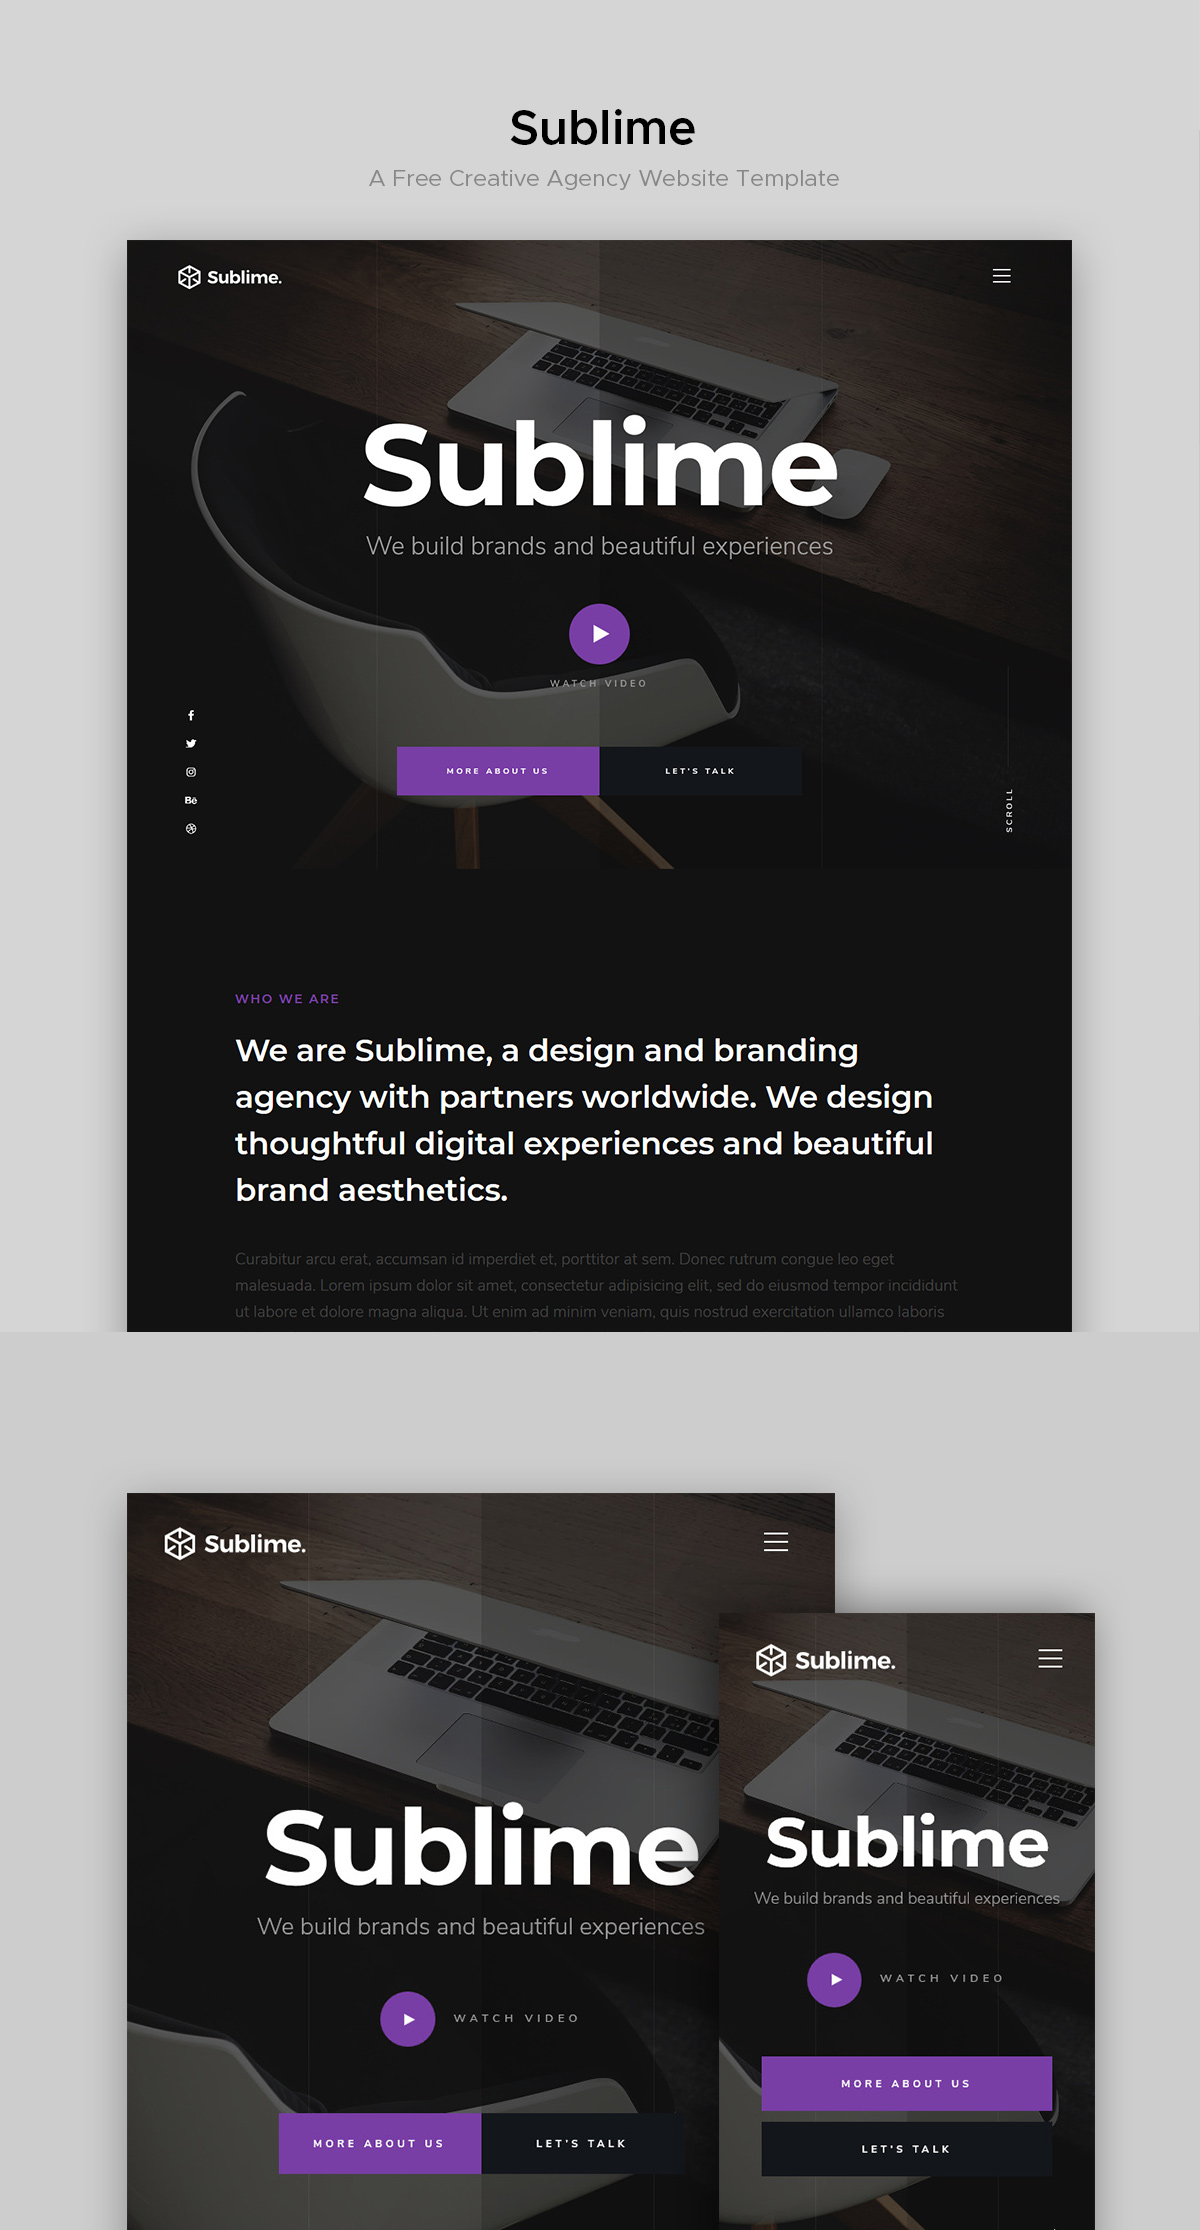 Sublime - free website template for creative agencies